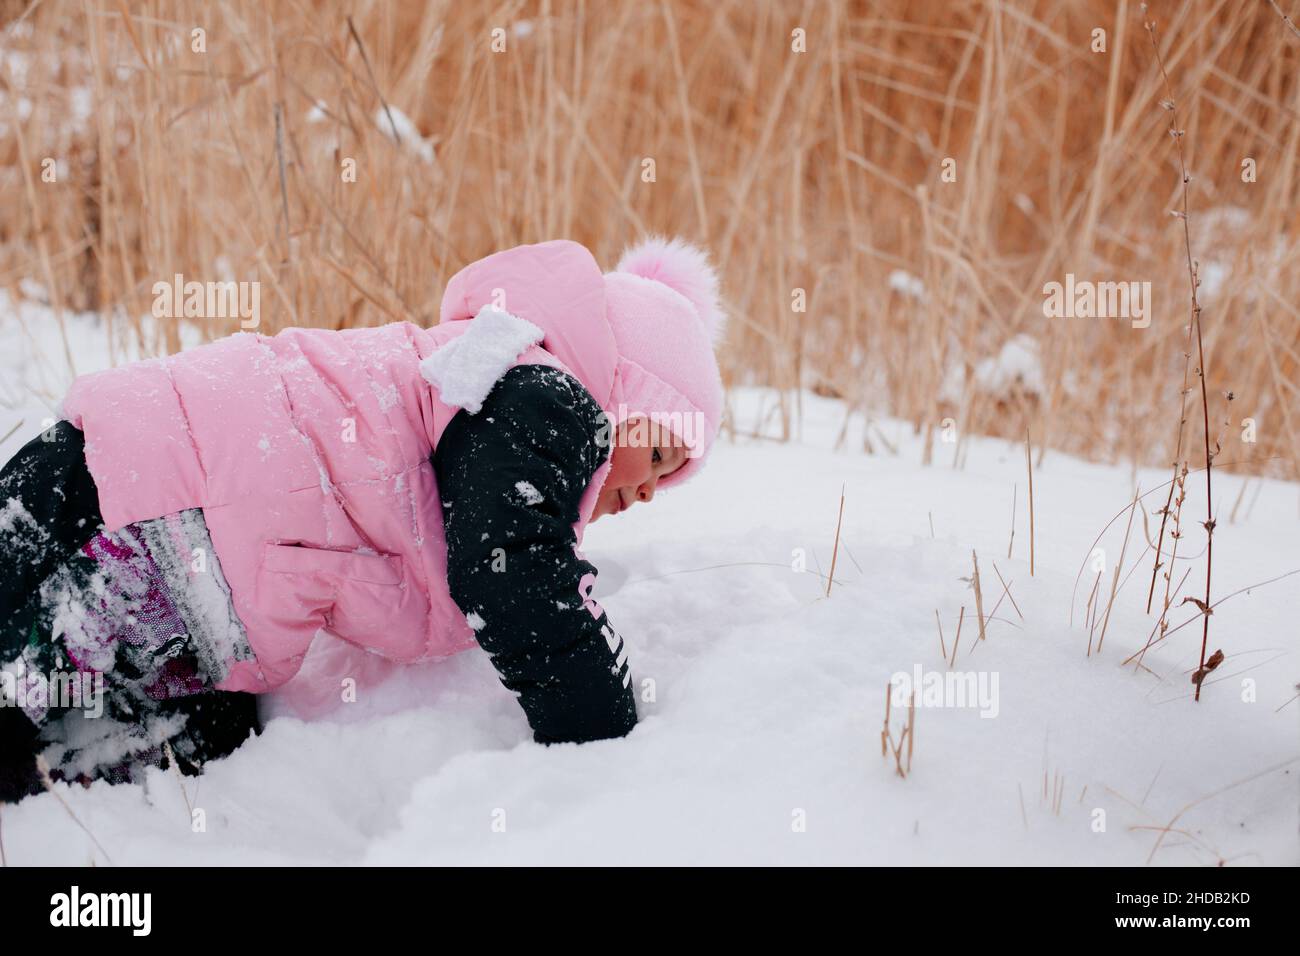 Children Wearing Snow Clothes In Winter High-Res Stock Photo